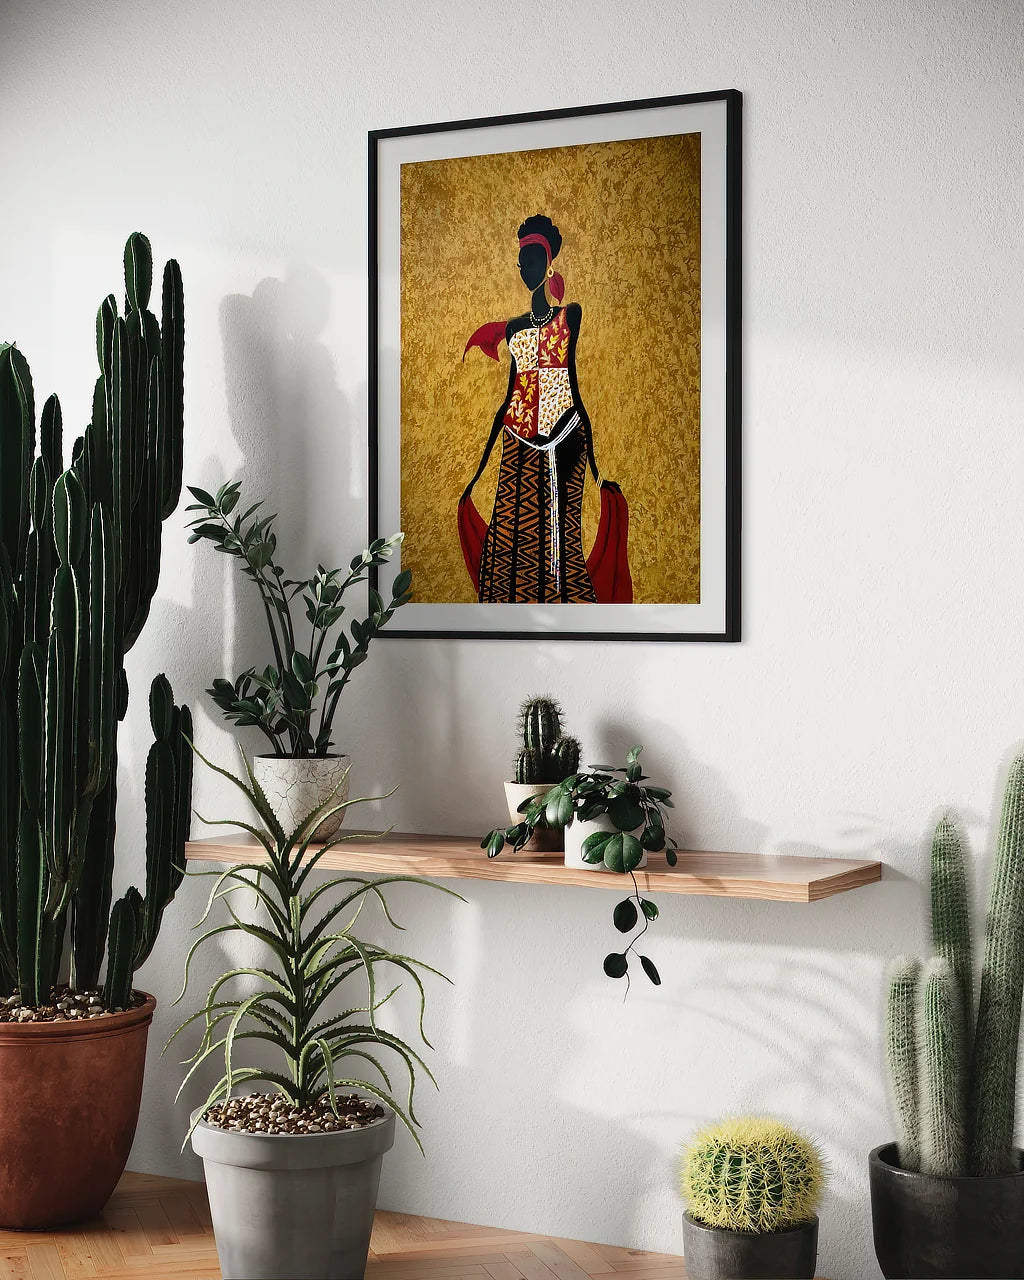 A limited edition contemporary modern art print named-Chi hanging over a shelf with potted plants in front | Sonia Malboeuf